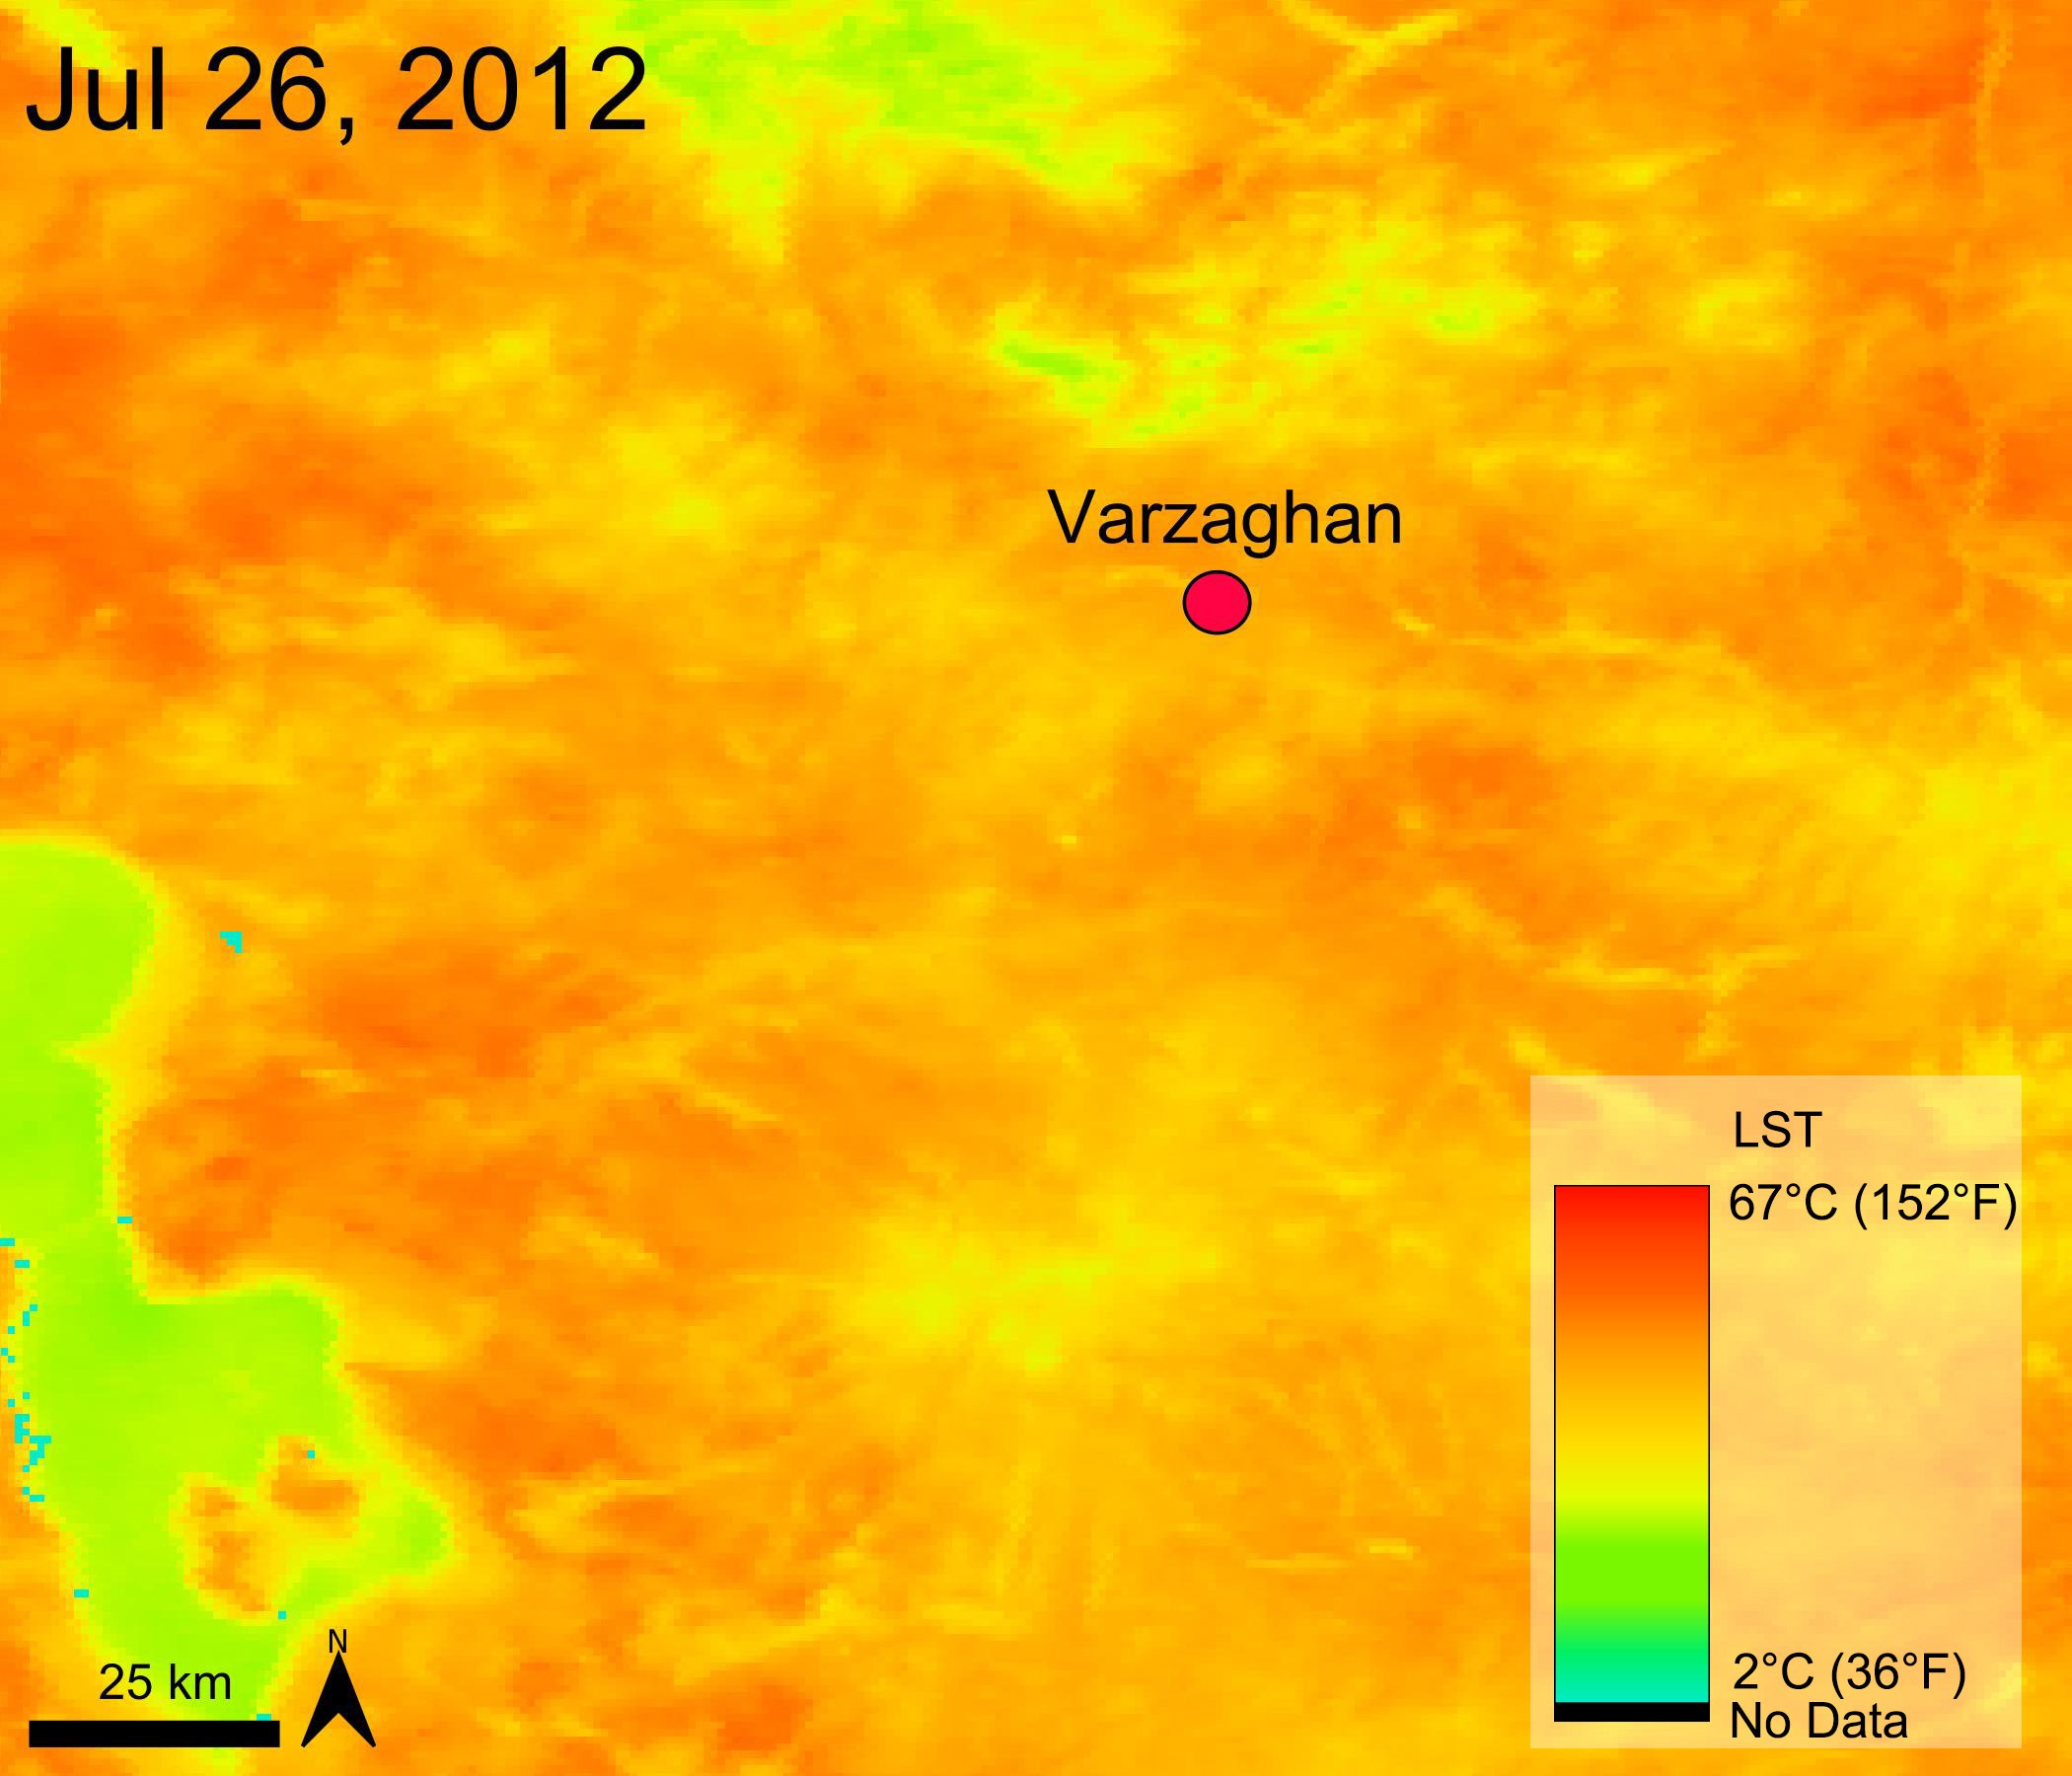 A Terra MODIS image showing land surface temperature data over part of Iran.